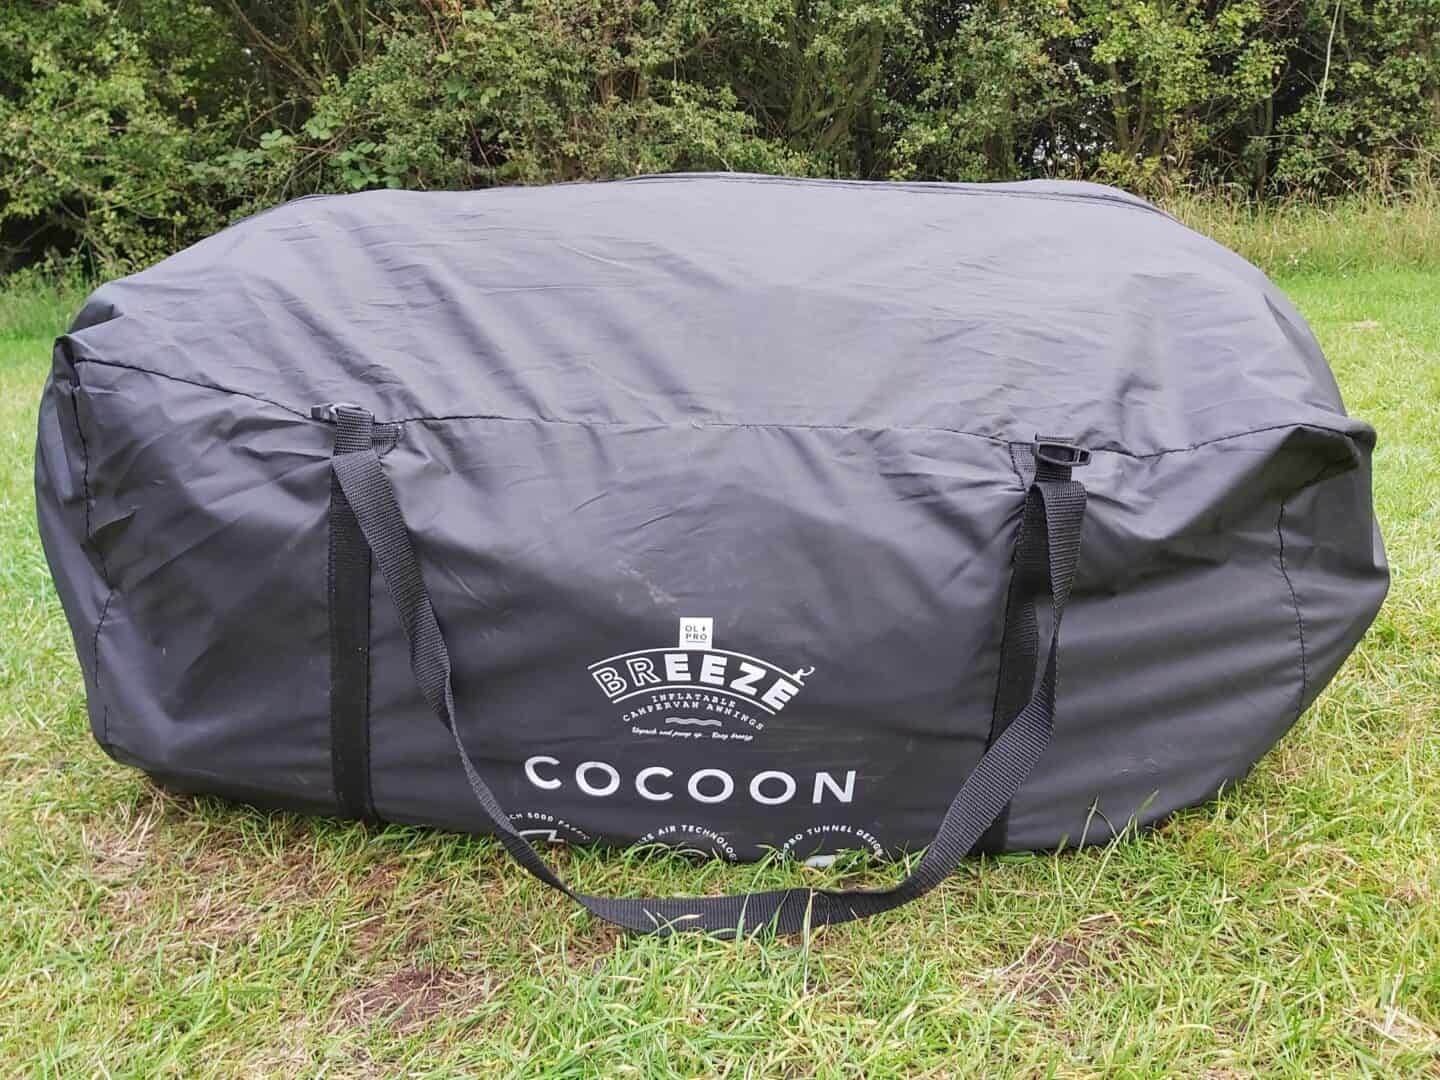 Olpro Cocoon Breeze awning in its black packing bag